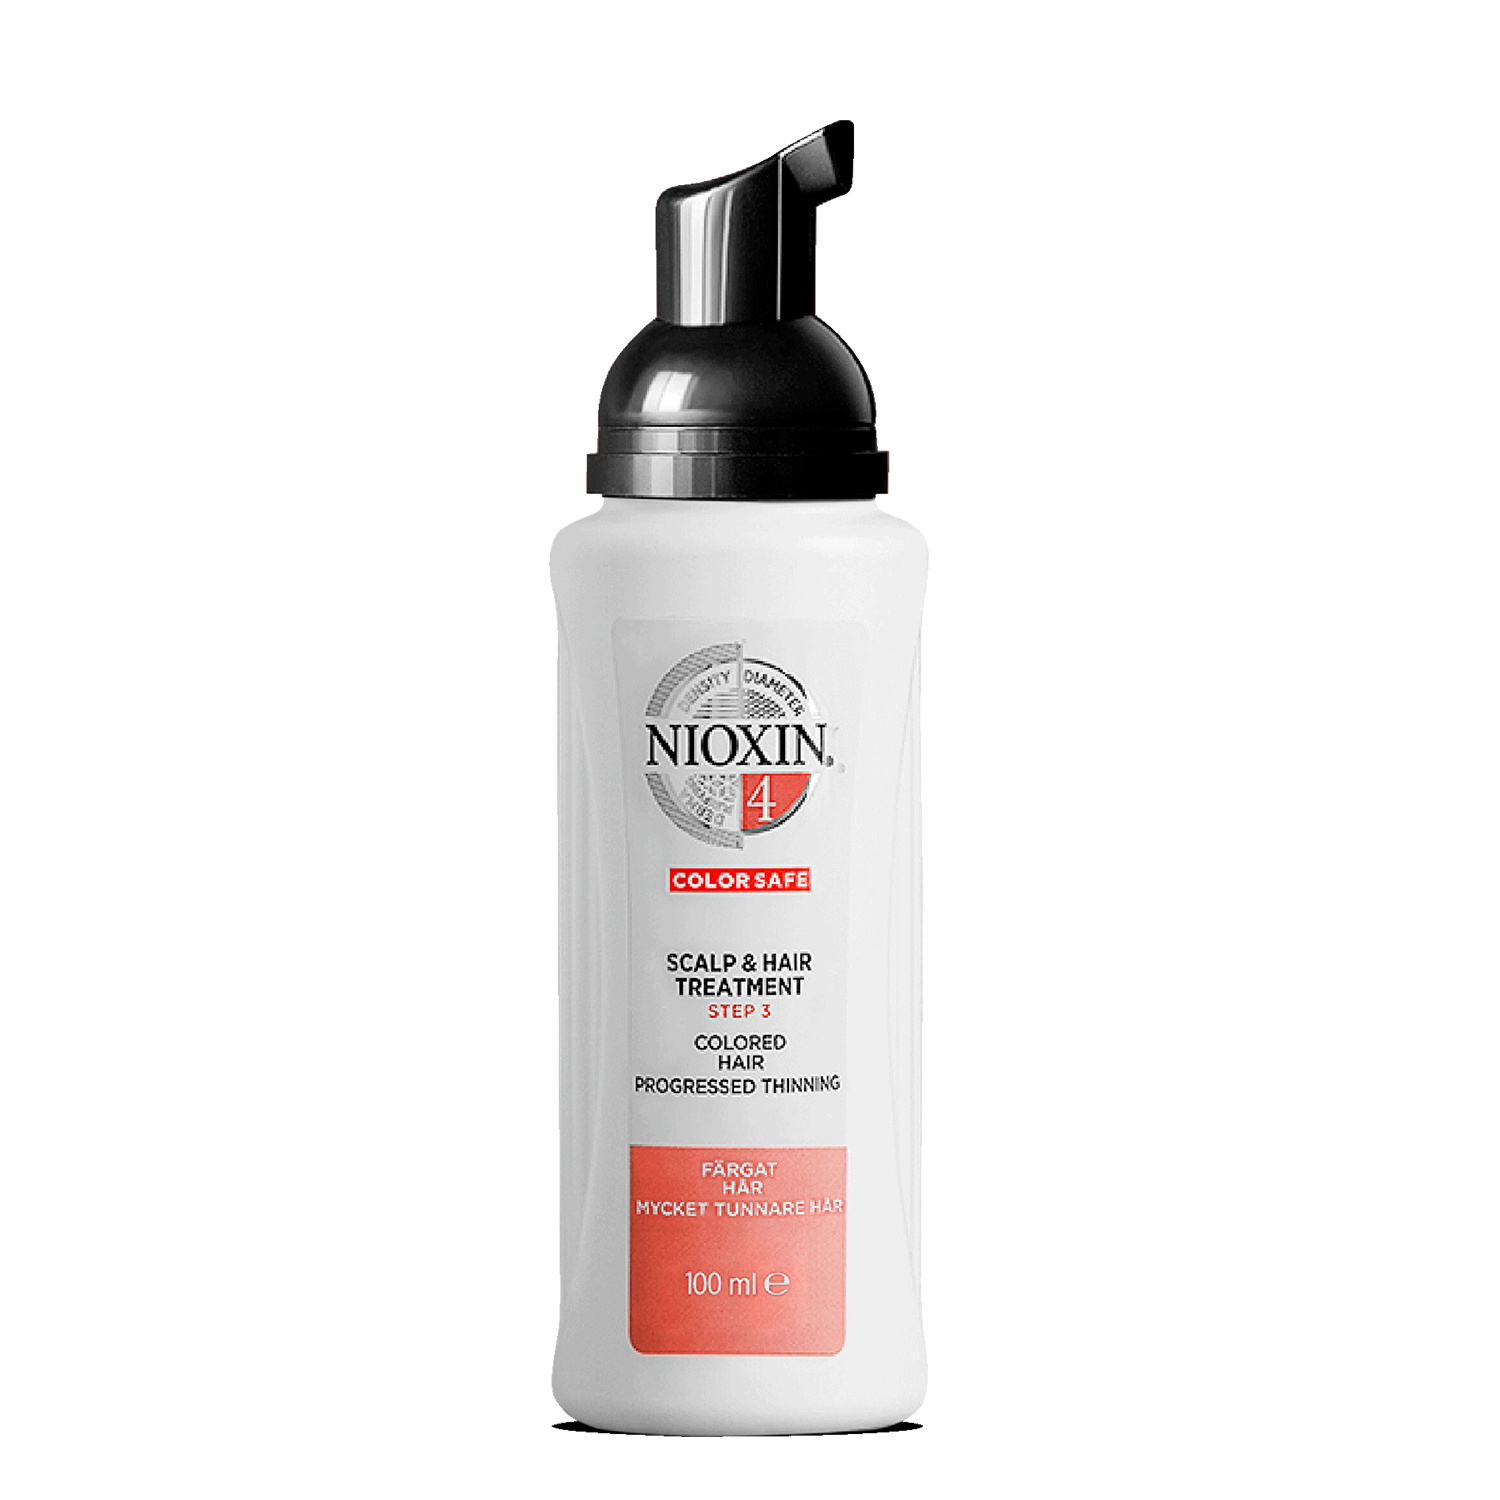 Nioxin 3 Part System 4 Scalp & Hair Treatment for Coloured Hair with Progressed Thinning